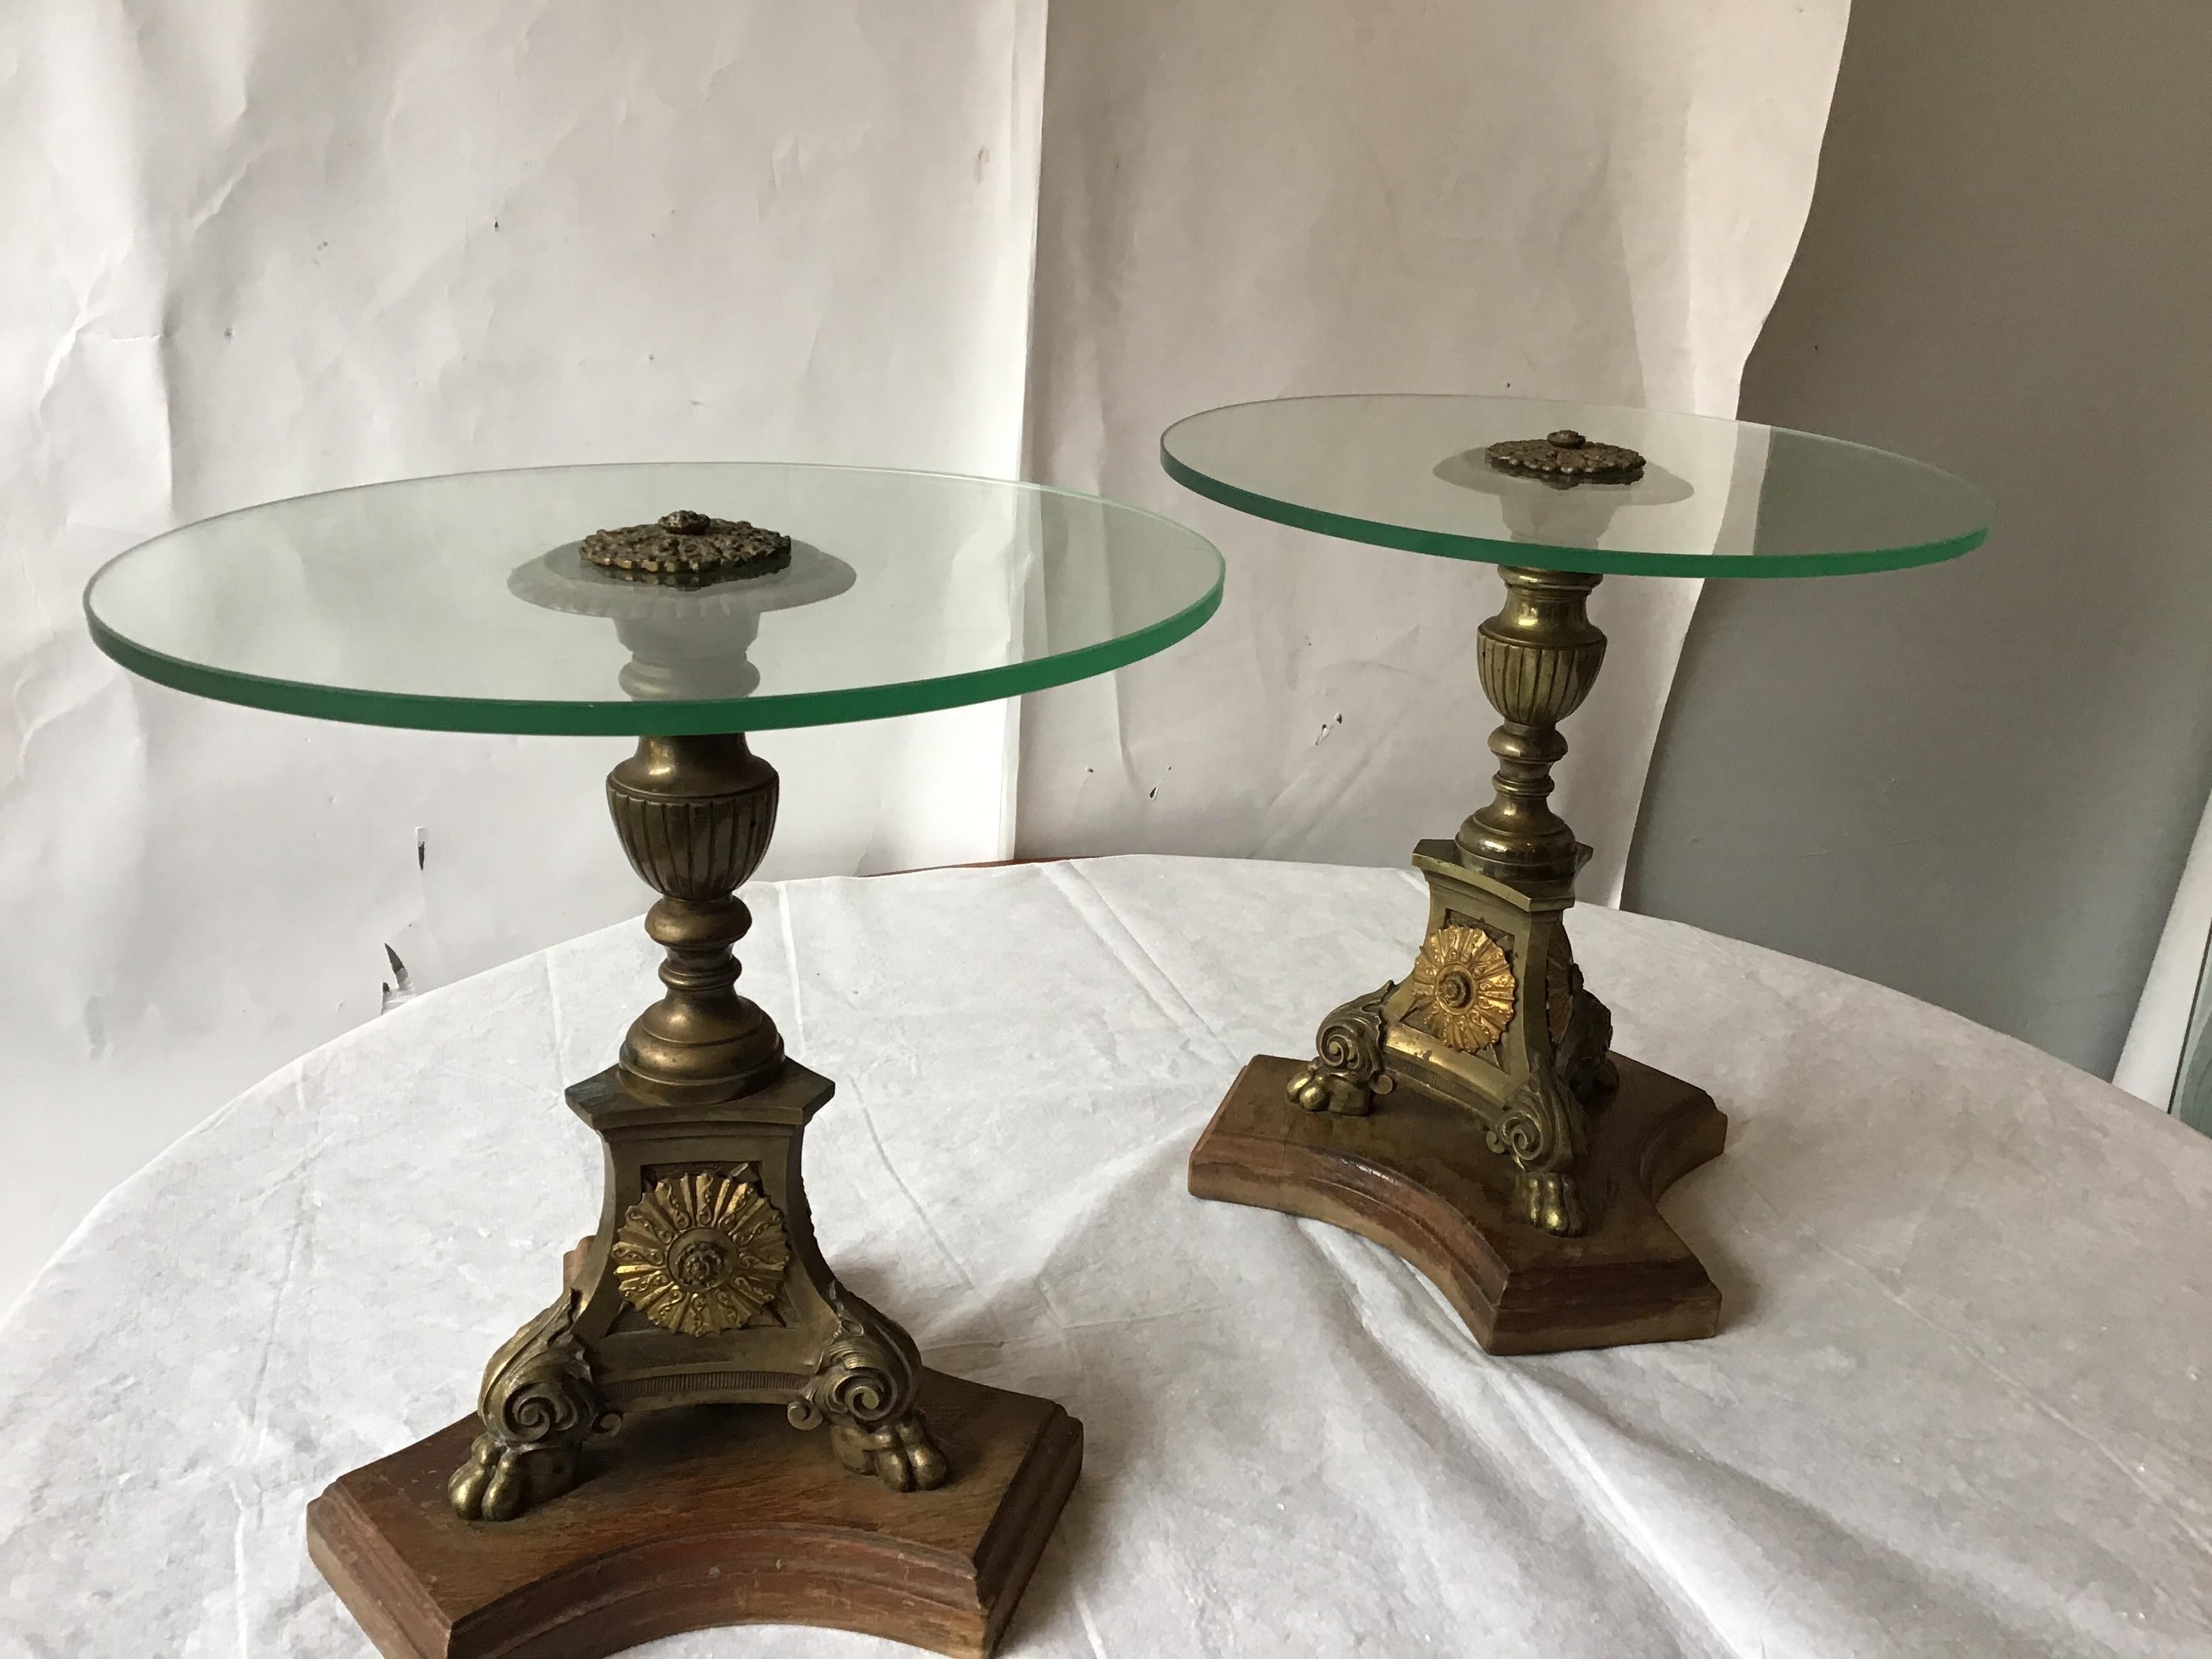 Pair of 19th century brass church candlesticks, that were turned into side tables on custom wood bases.